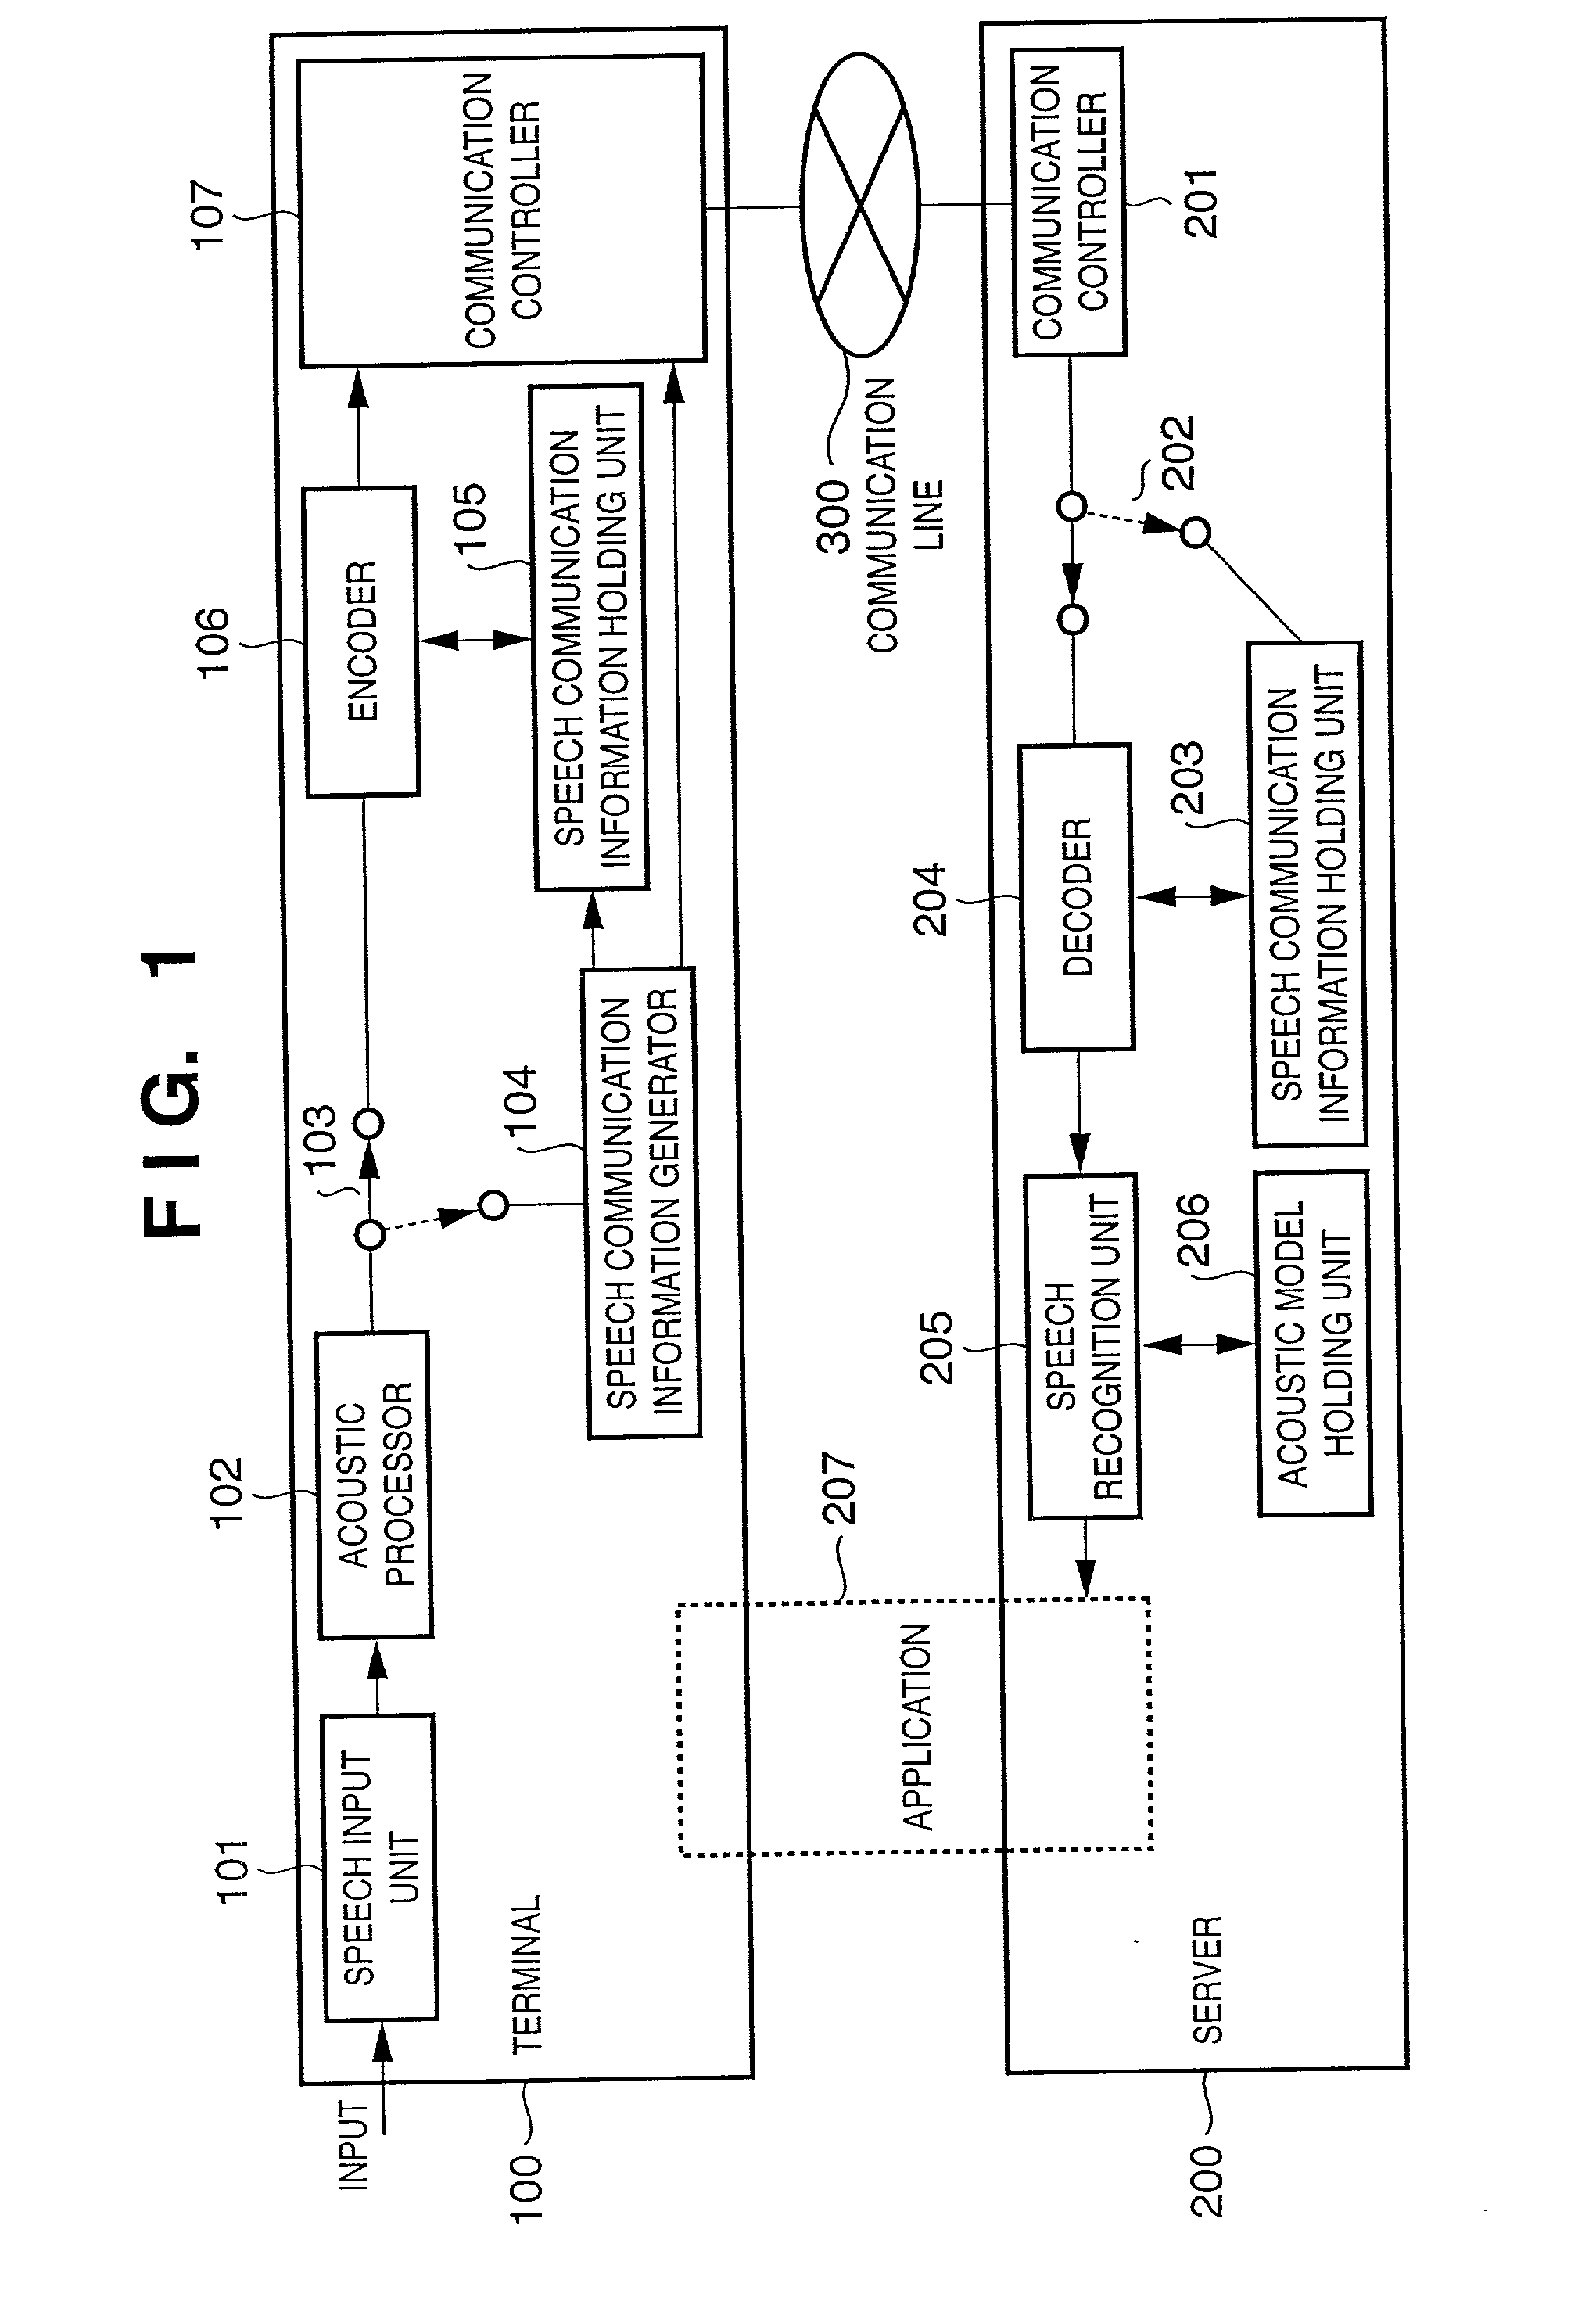 Speech recognition system and method, and information processing apparatus and method used in that system